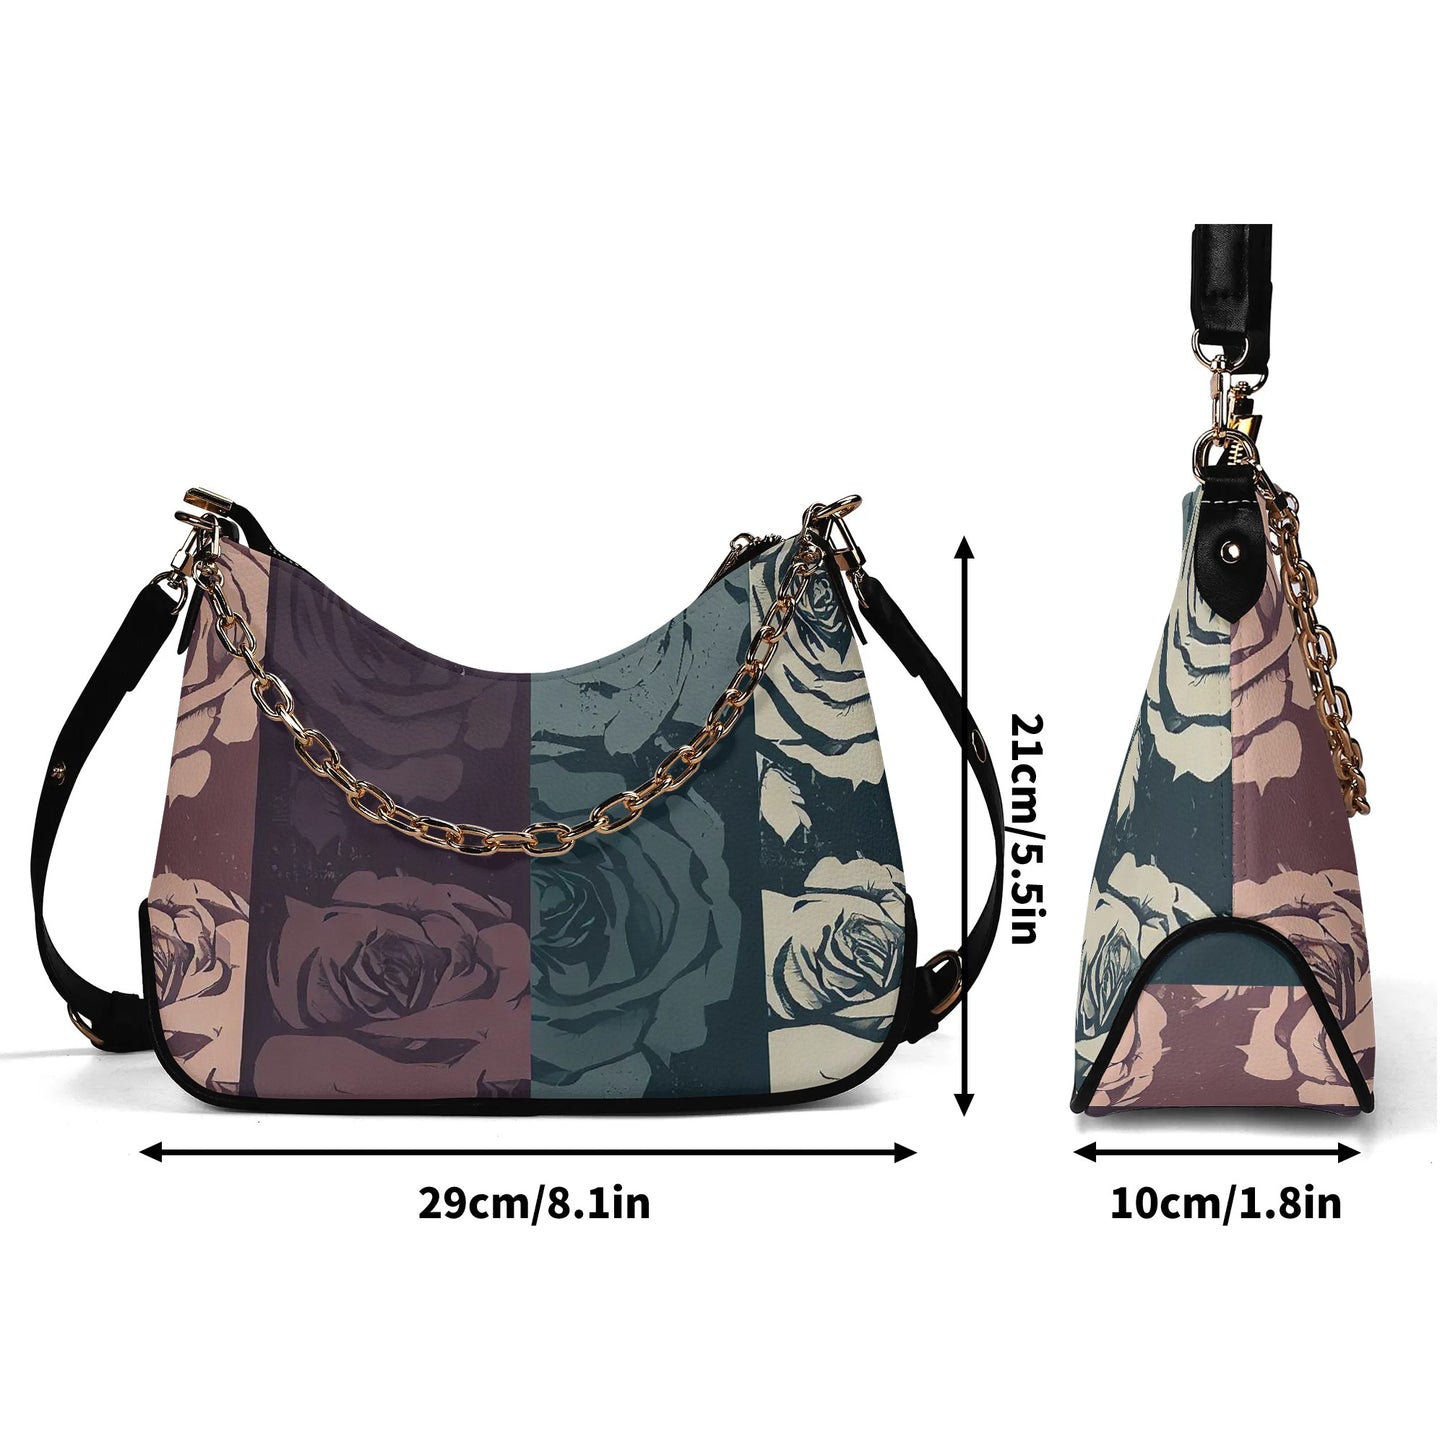 Vampire Art Grunge Distressed PU Cross-body Bag With Chain Decoration - Roses